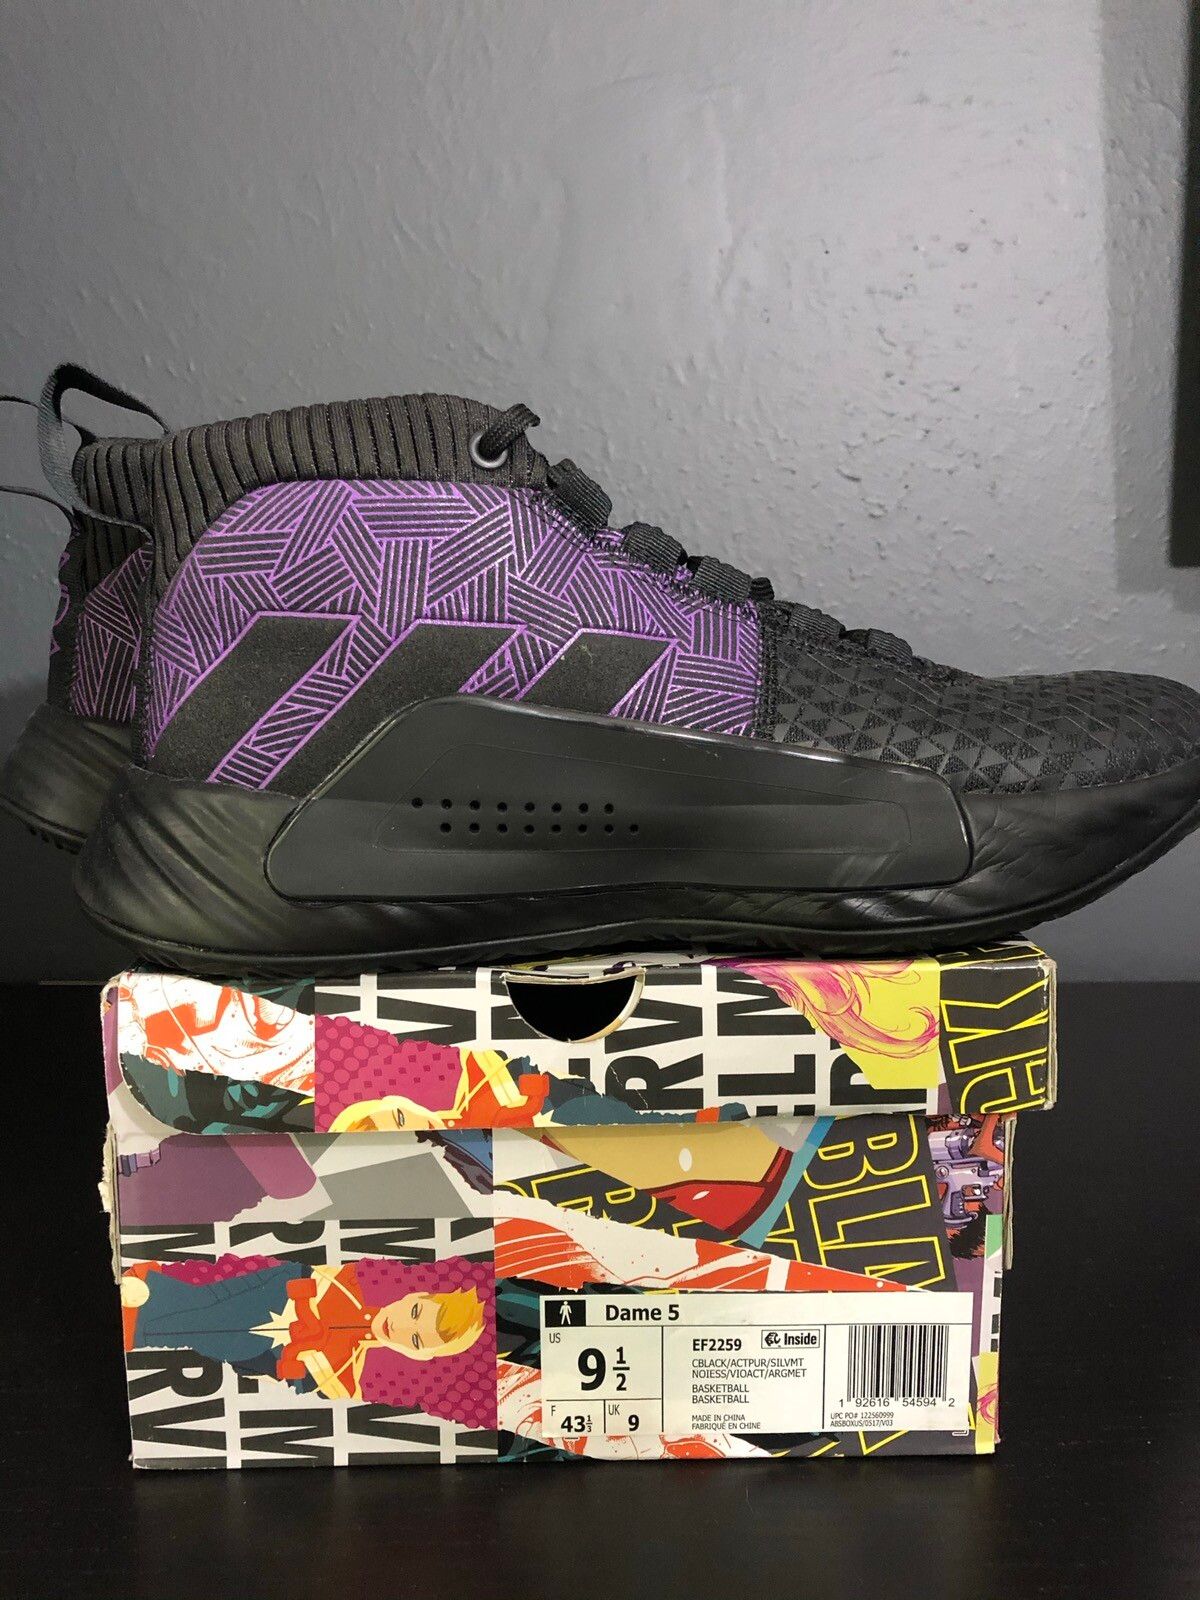 Adidas Marvel x Dame 5 Heroes Among Us: Black Panther 2019 Size US 9.5 / EU 42-43 - 1 Preview